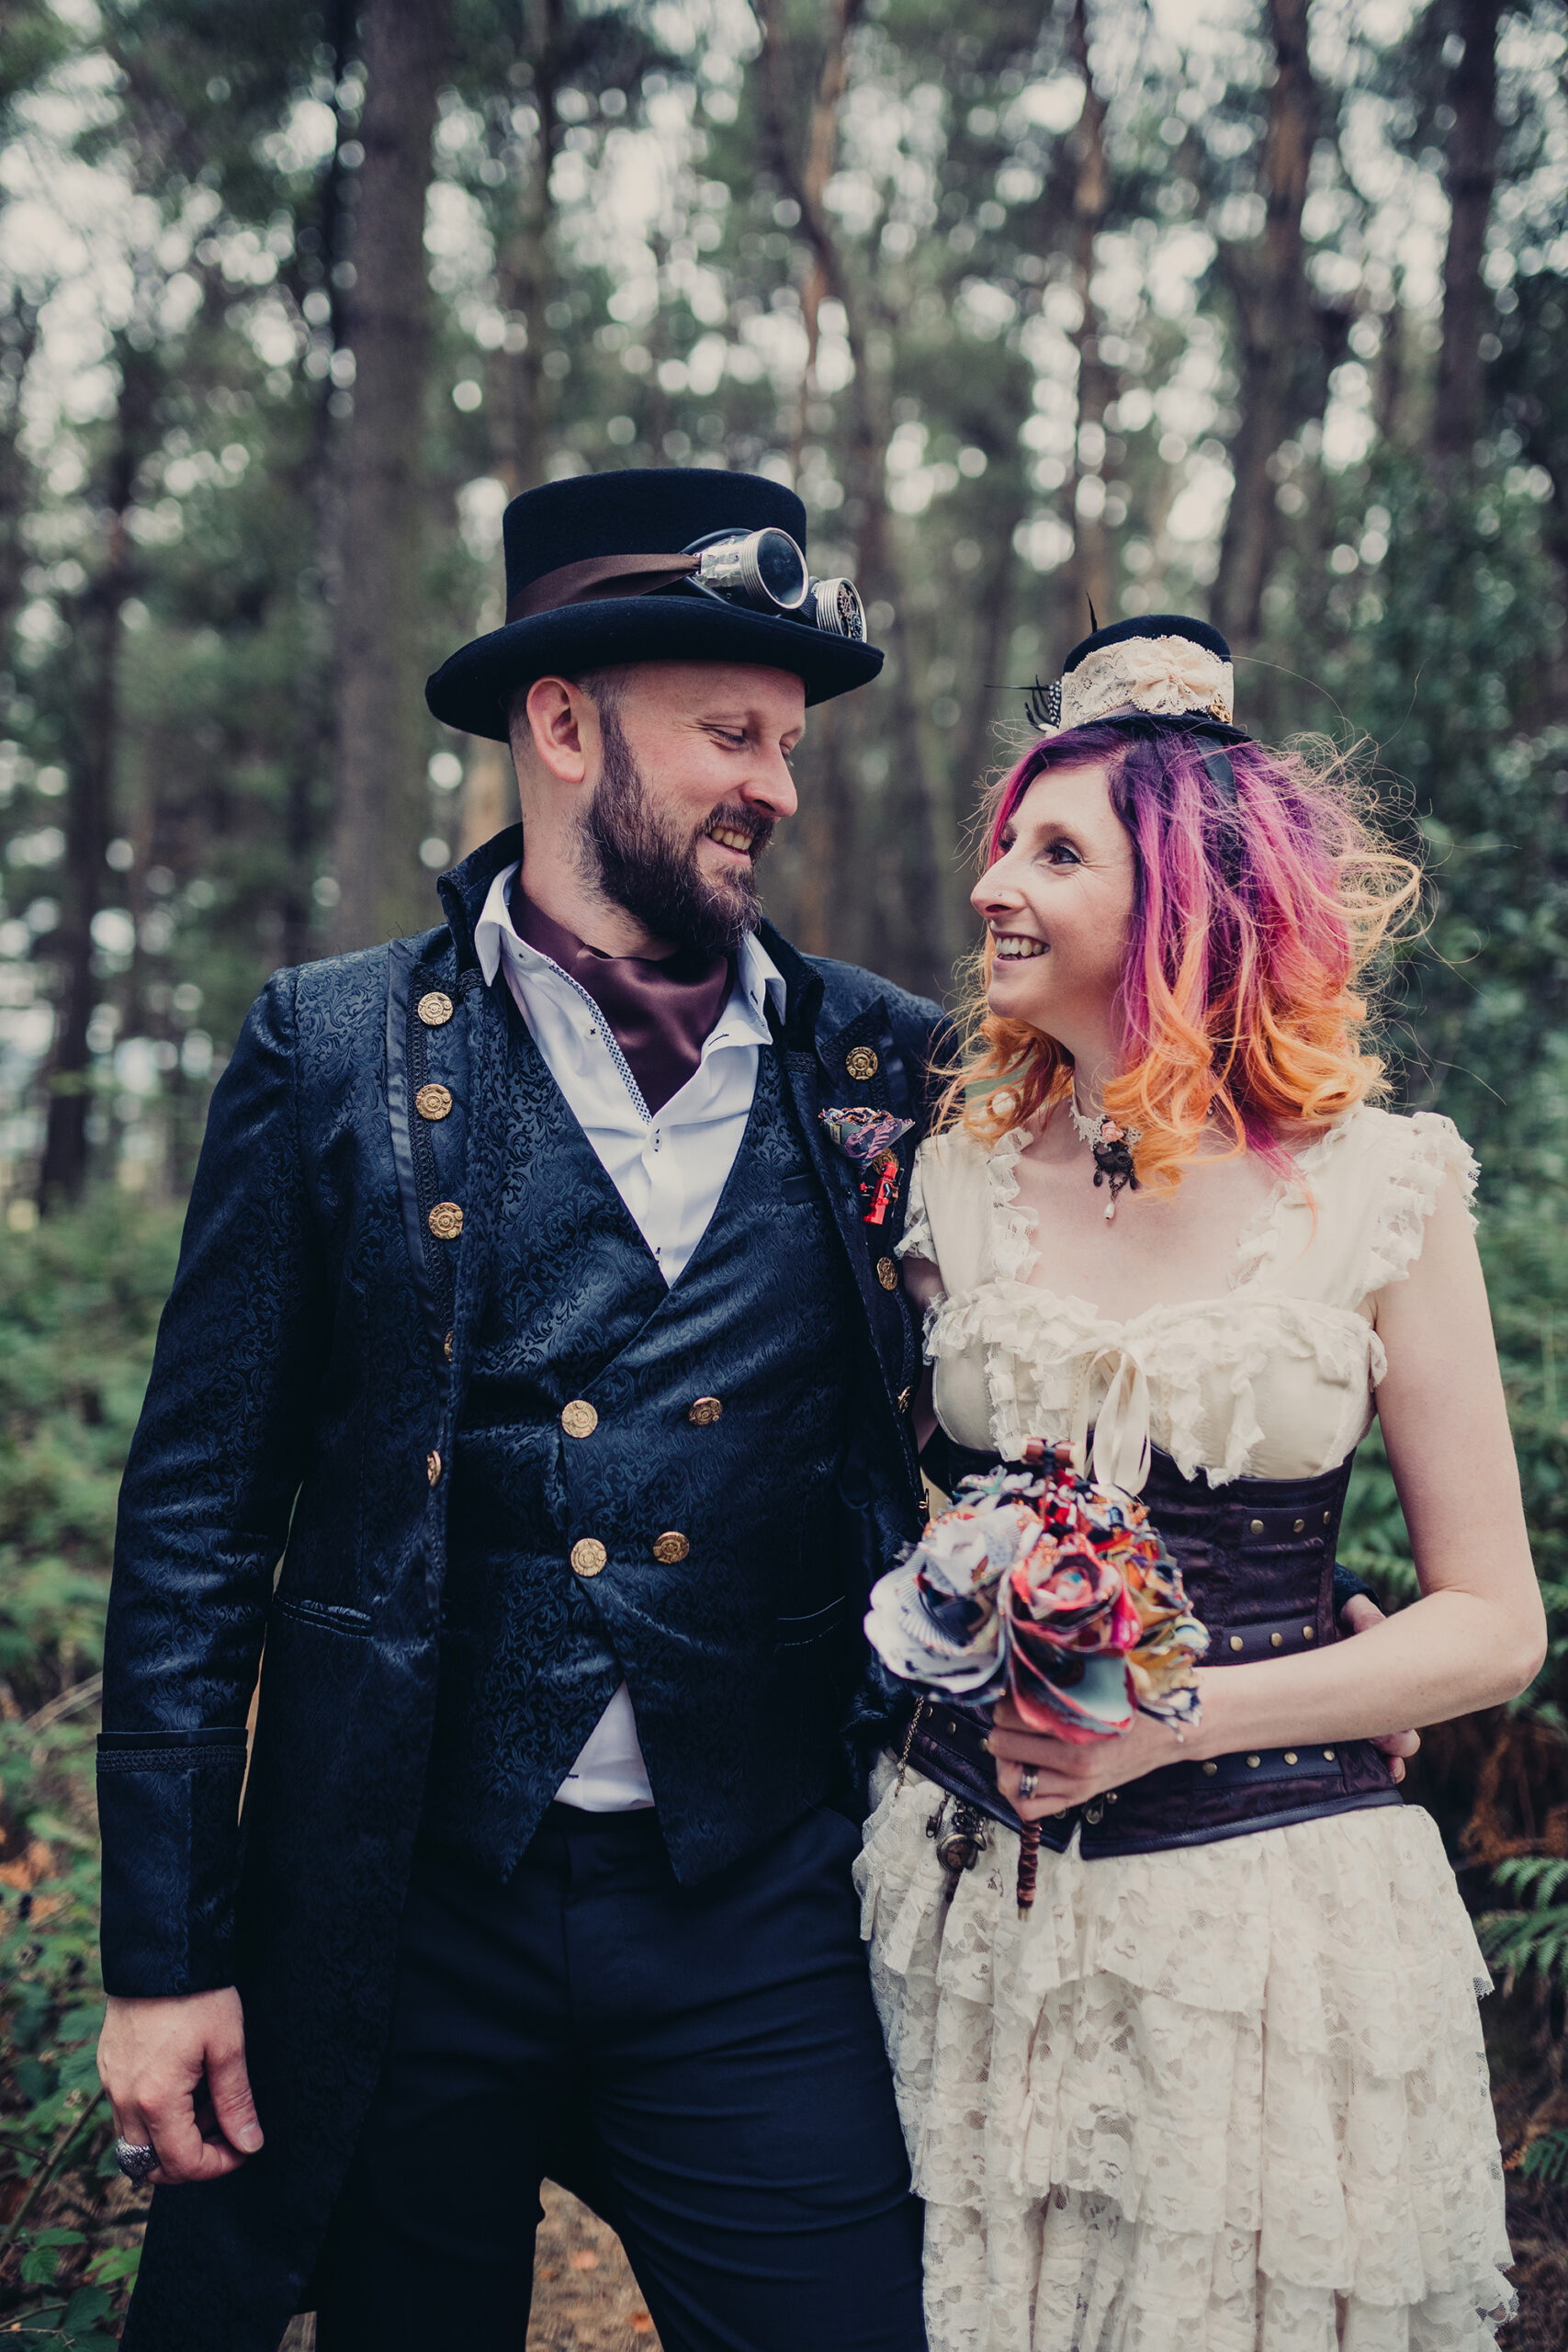 April Rien Steampunk Festival Wedding Chelsea Shoesmith Photography SBS 029 scaled